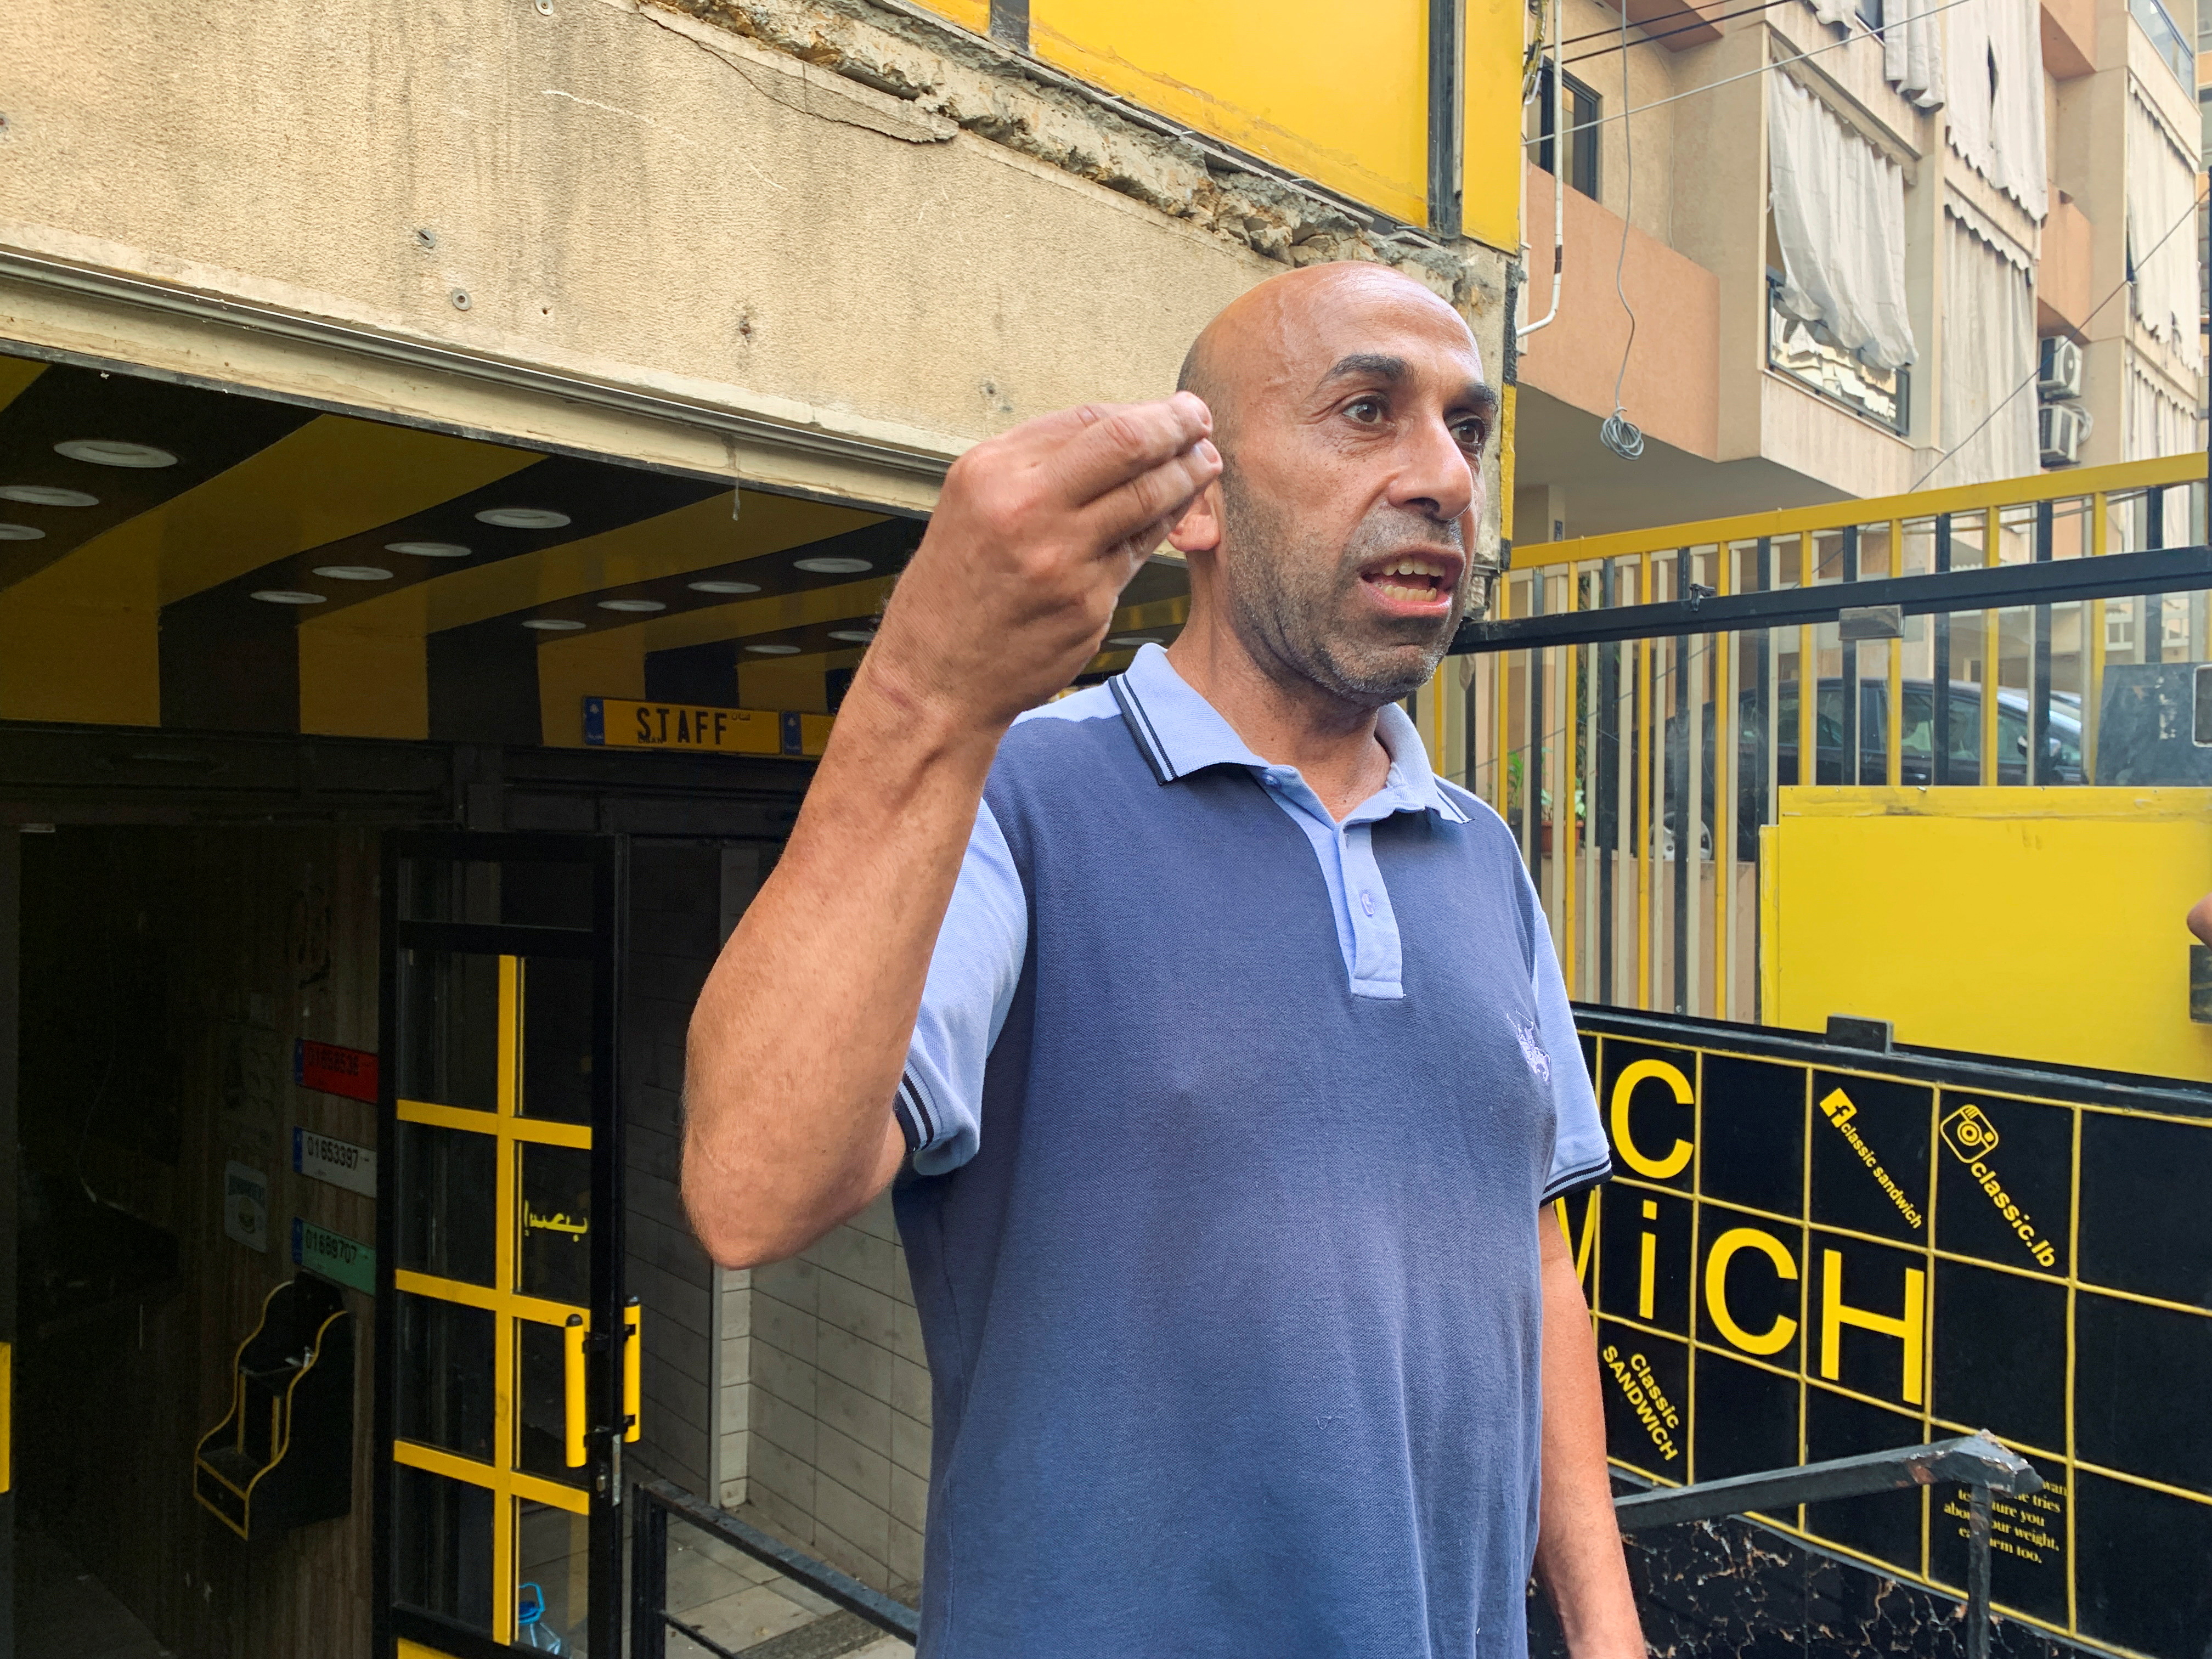 Ibrahim Jaber, a chef who used to work at Classic Sandwich restaurant, gestures during an interview with Reuters, in Beirut